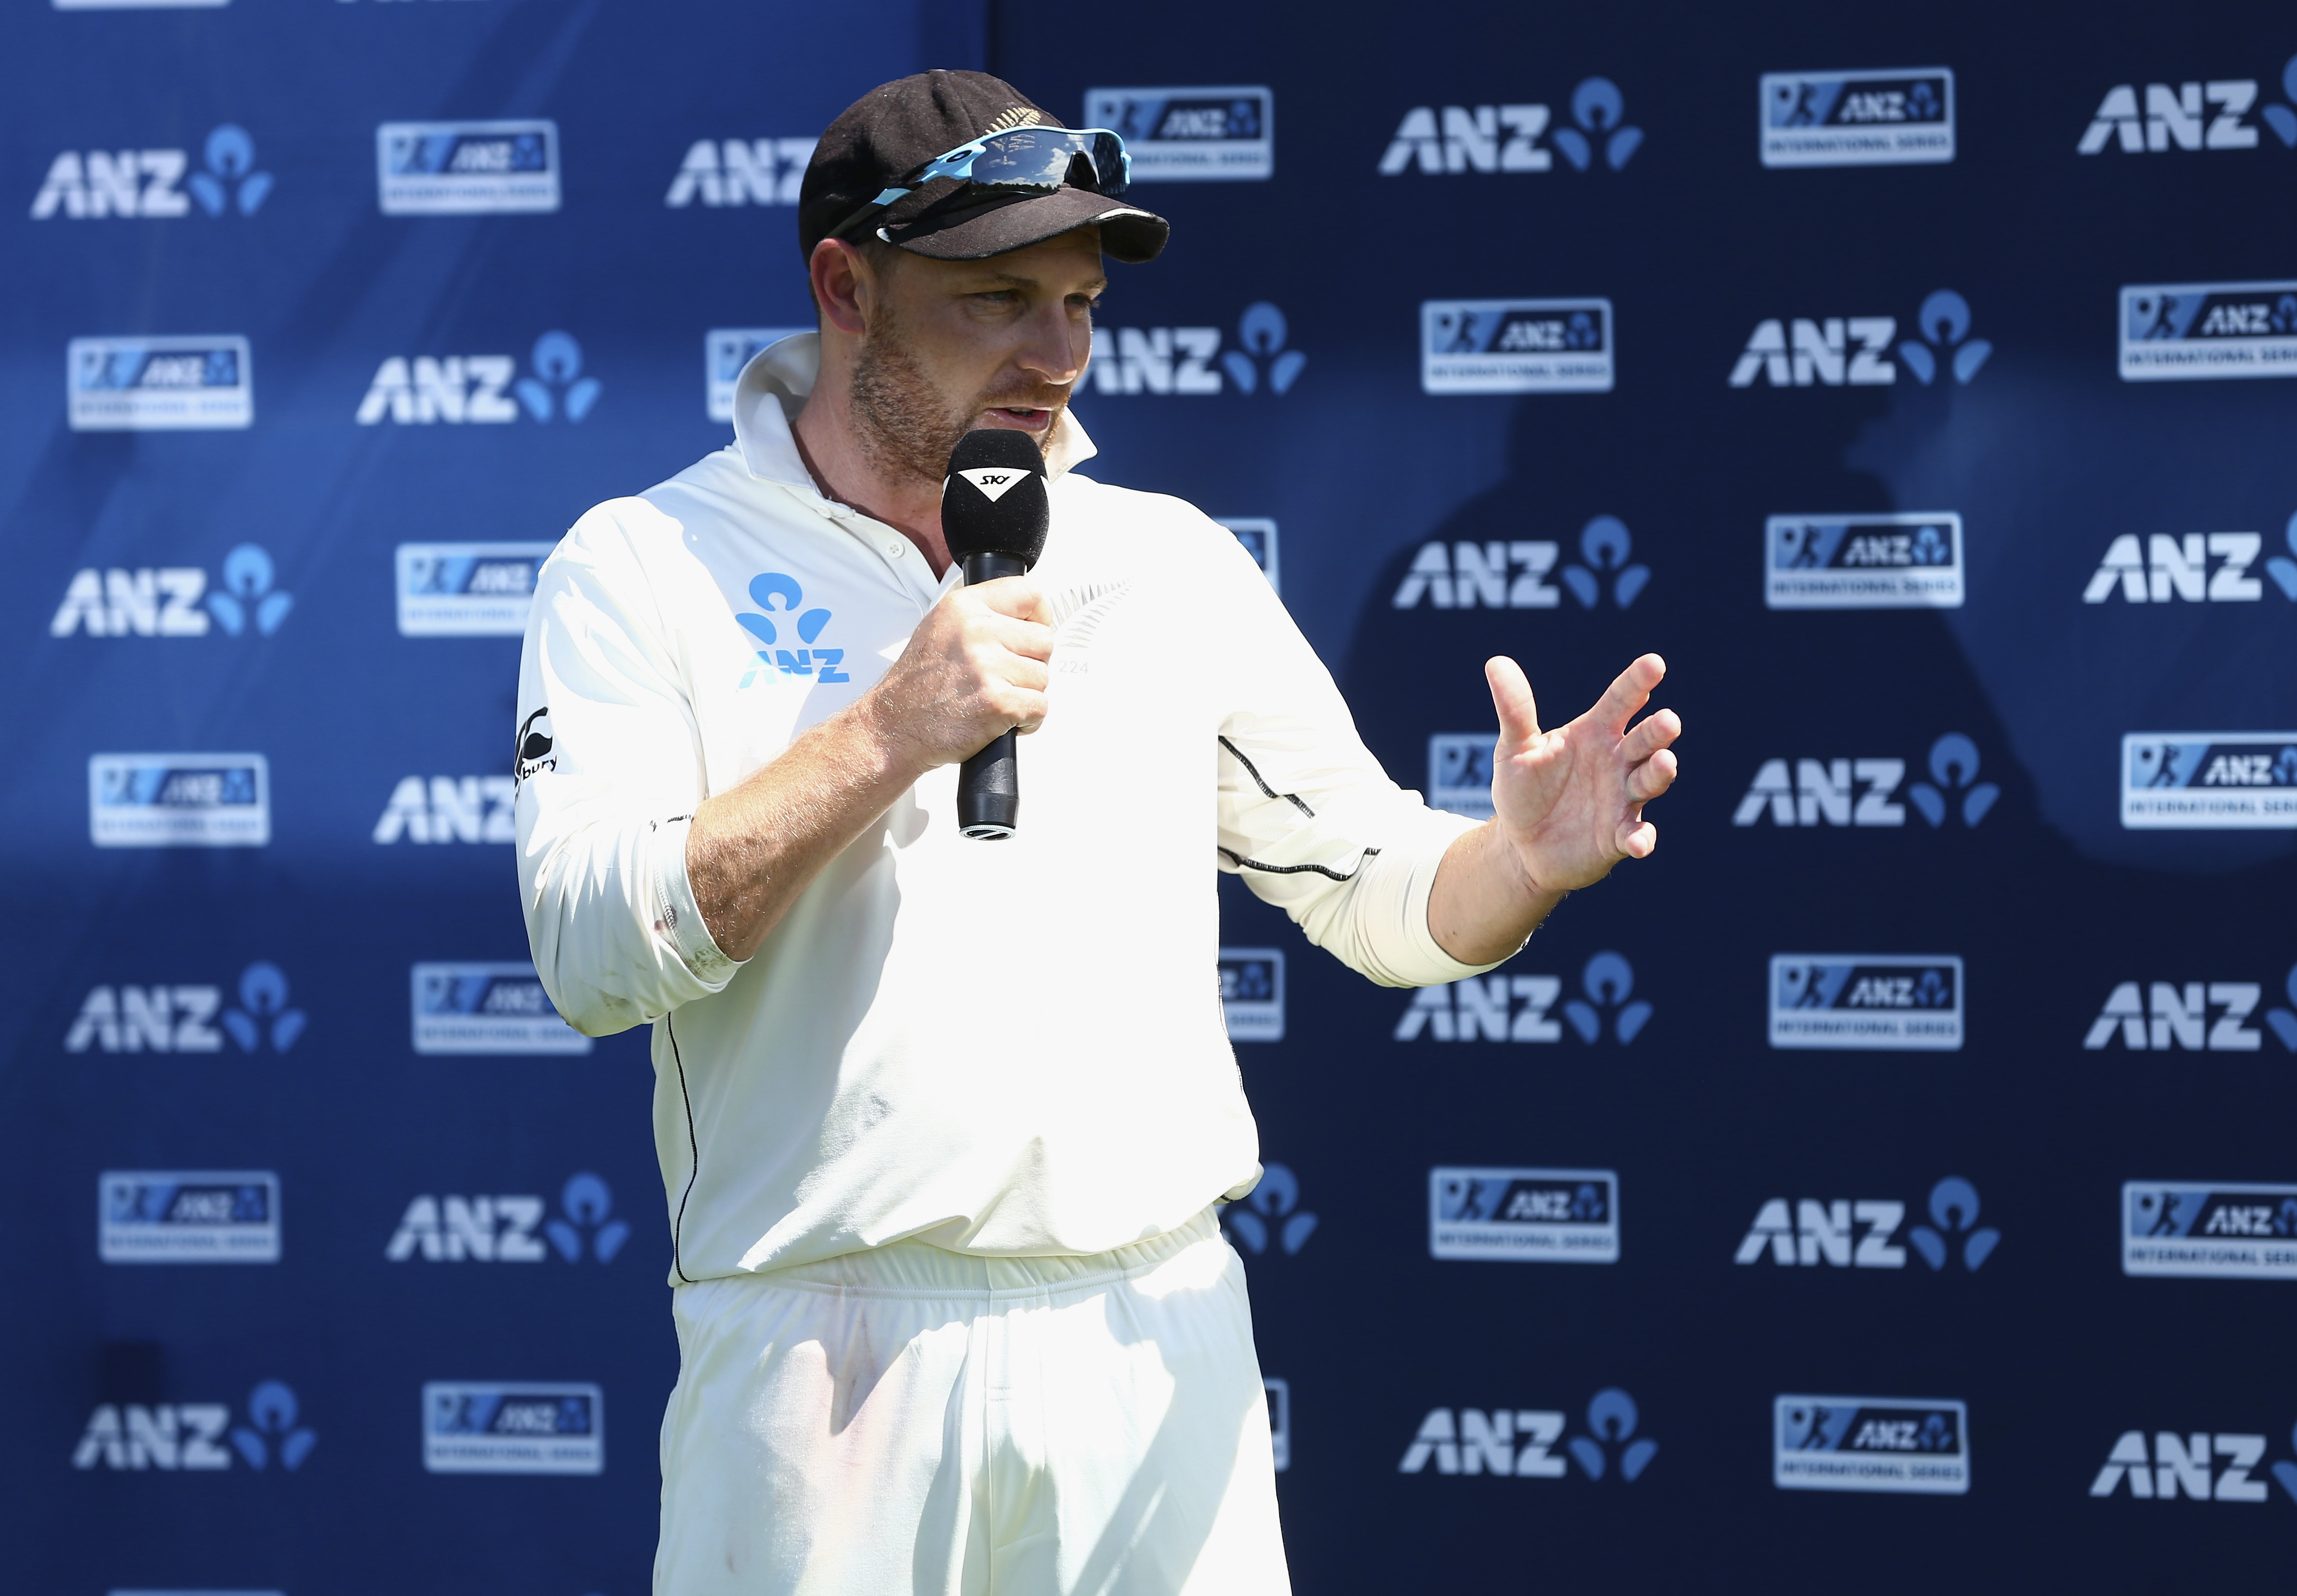 Brendon McCullum: How can ICC expect players to co-operate when it leaks statements to media?